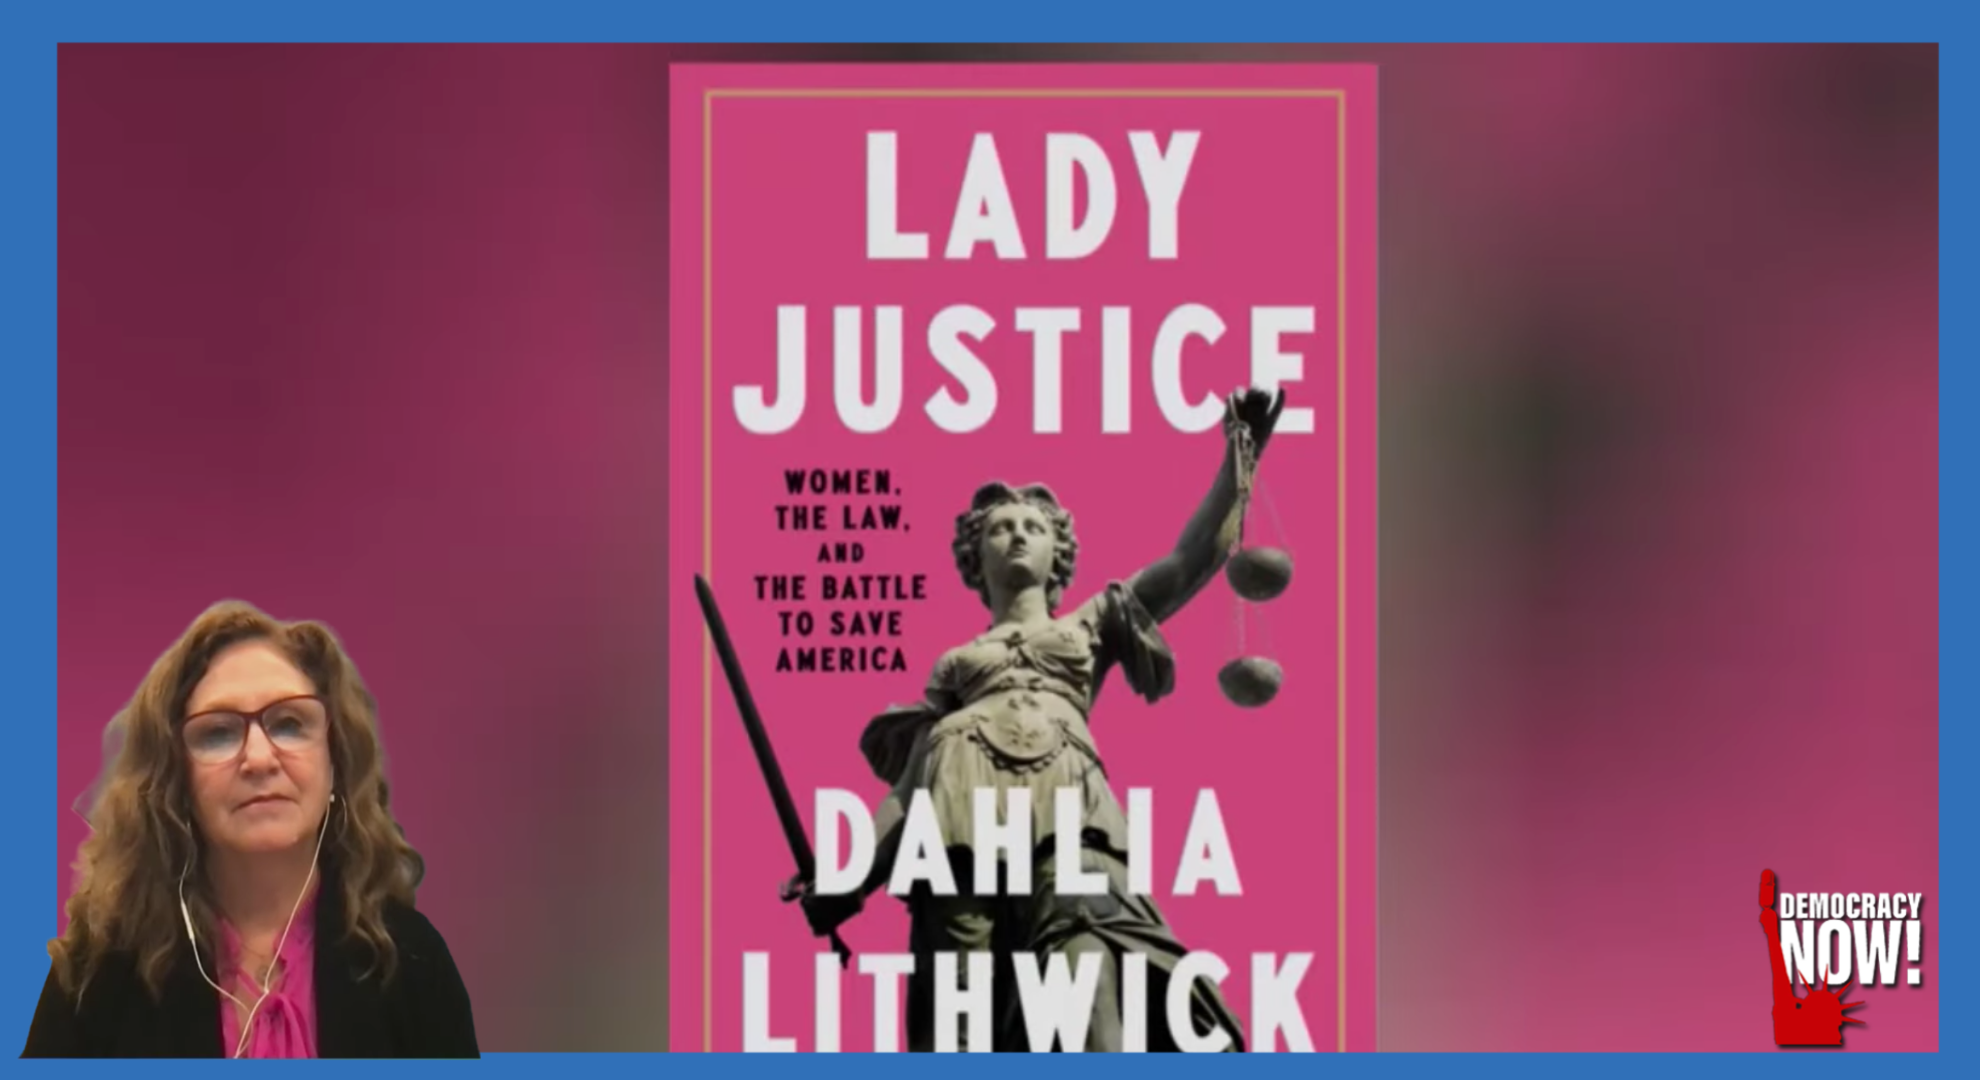 "Lady Justice": Dahlia Lithwick on Women Who Used the Law to Fight Racism, Sexism Under Trump & Won